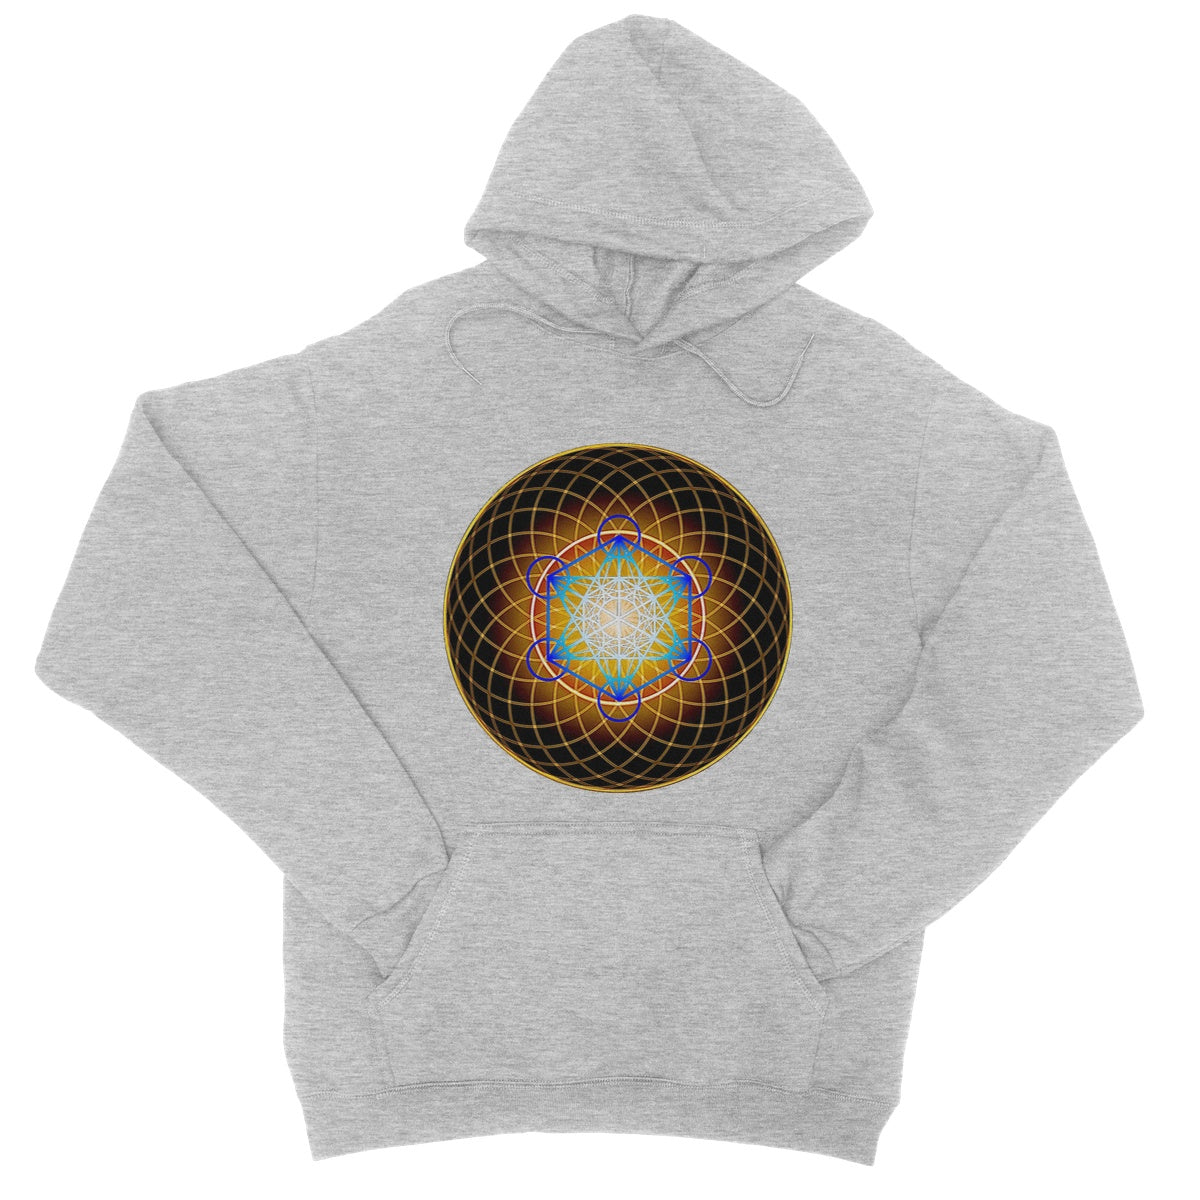 Metatron's Cube inside a New Flower of Life College Hoodie